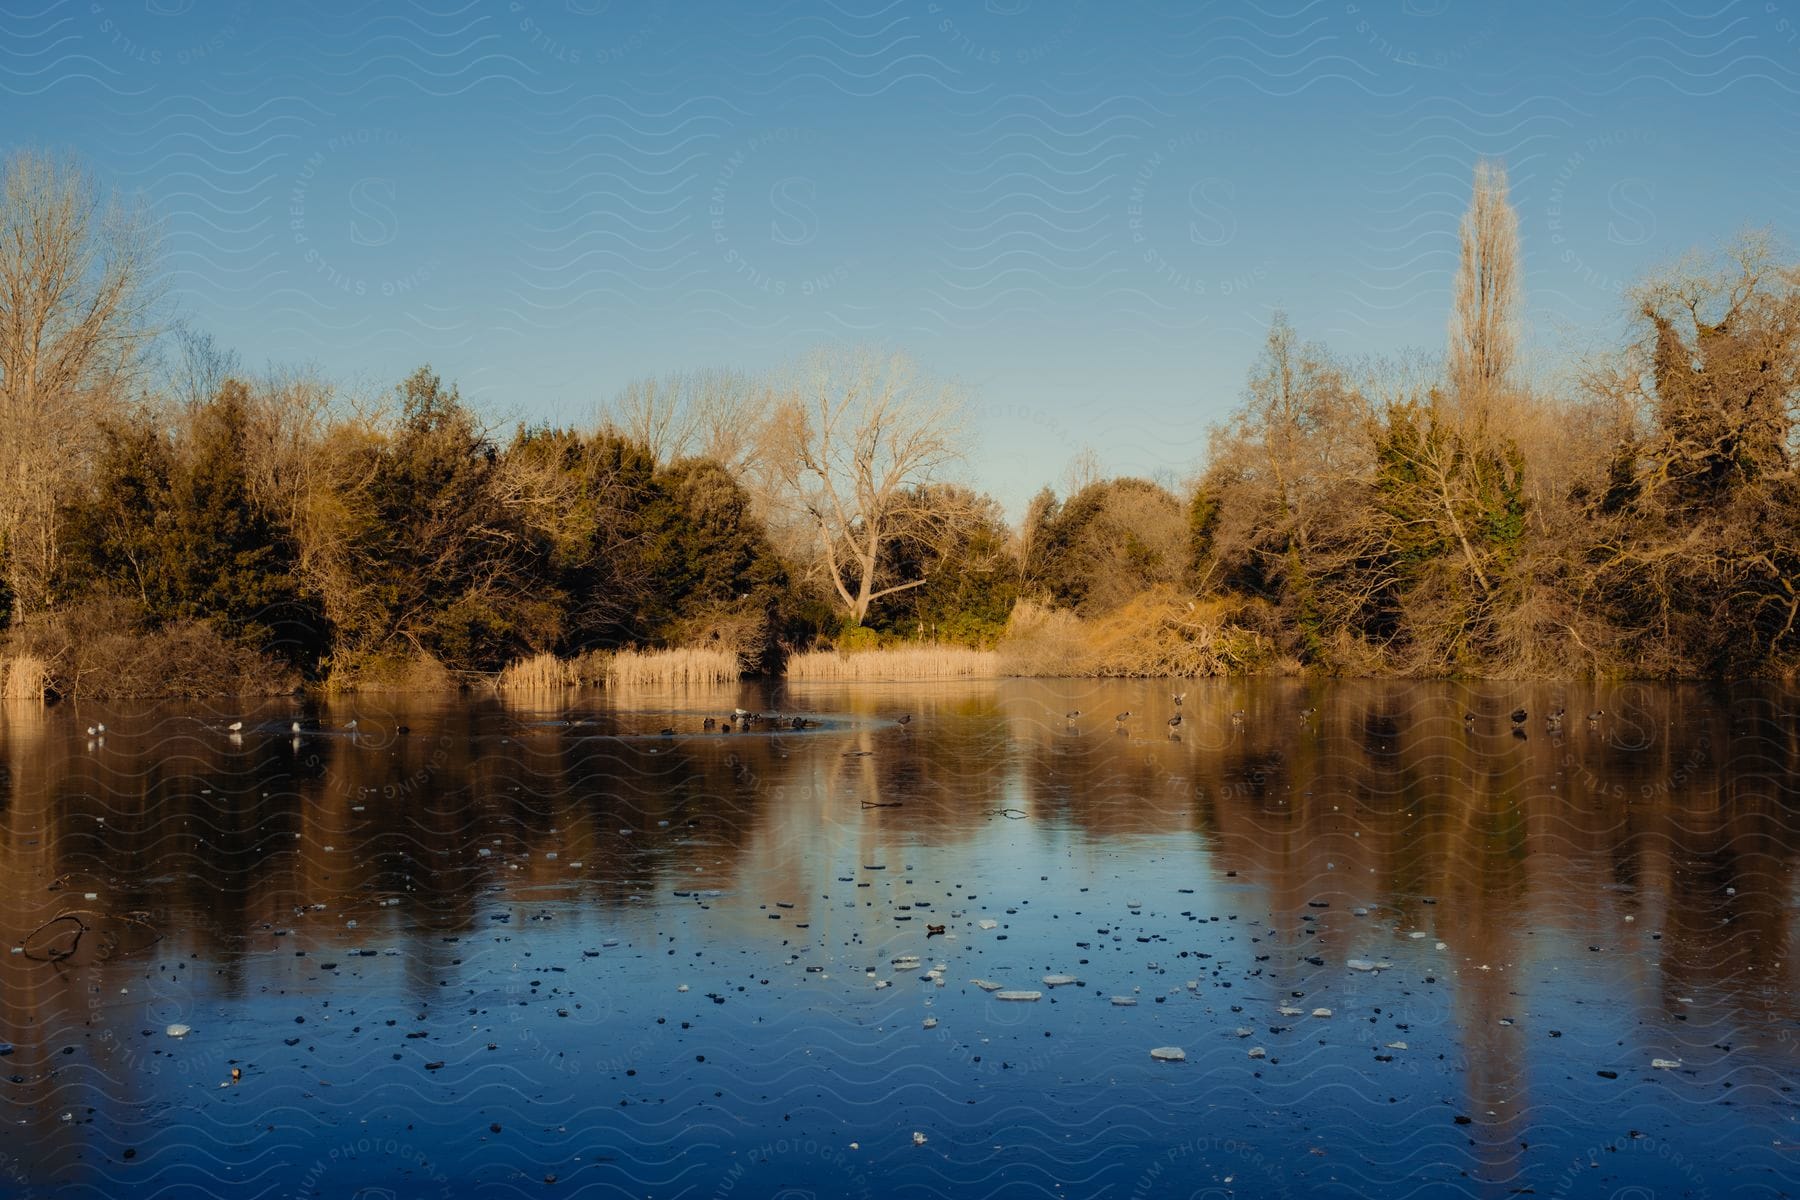 A lake with water reflecting the surrounding landscape and floating debris surrounded by trees and bushes under a clear sky.